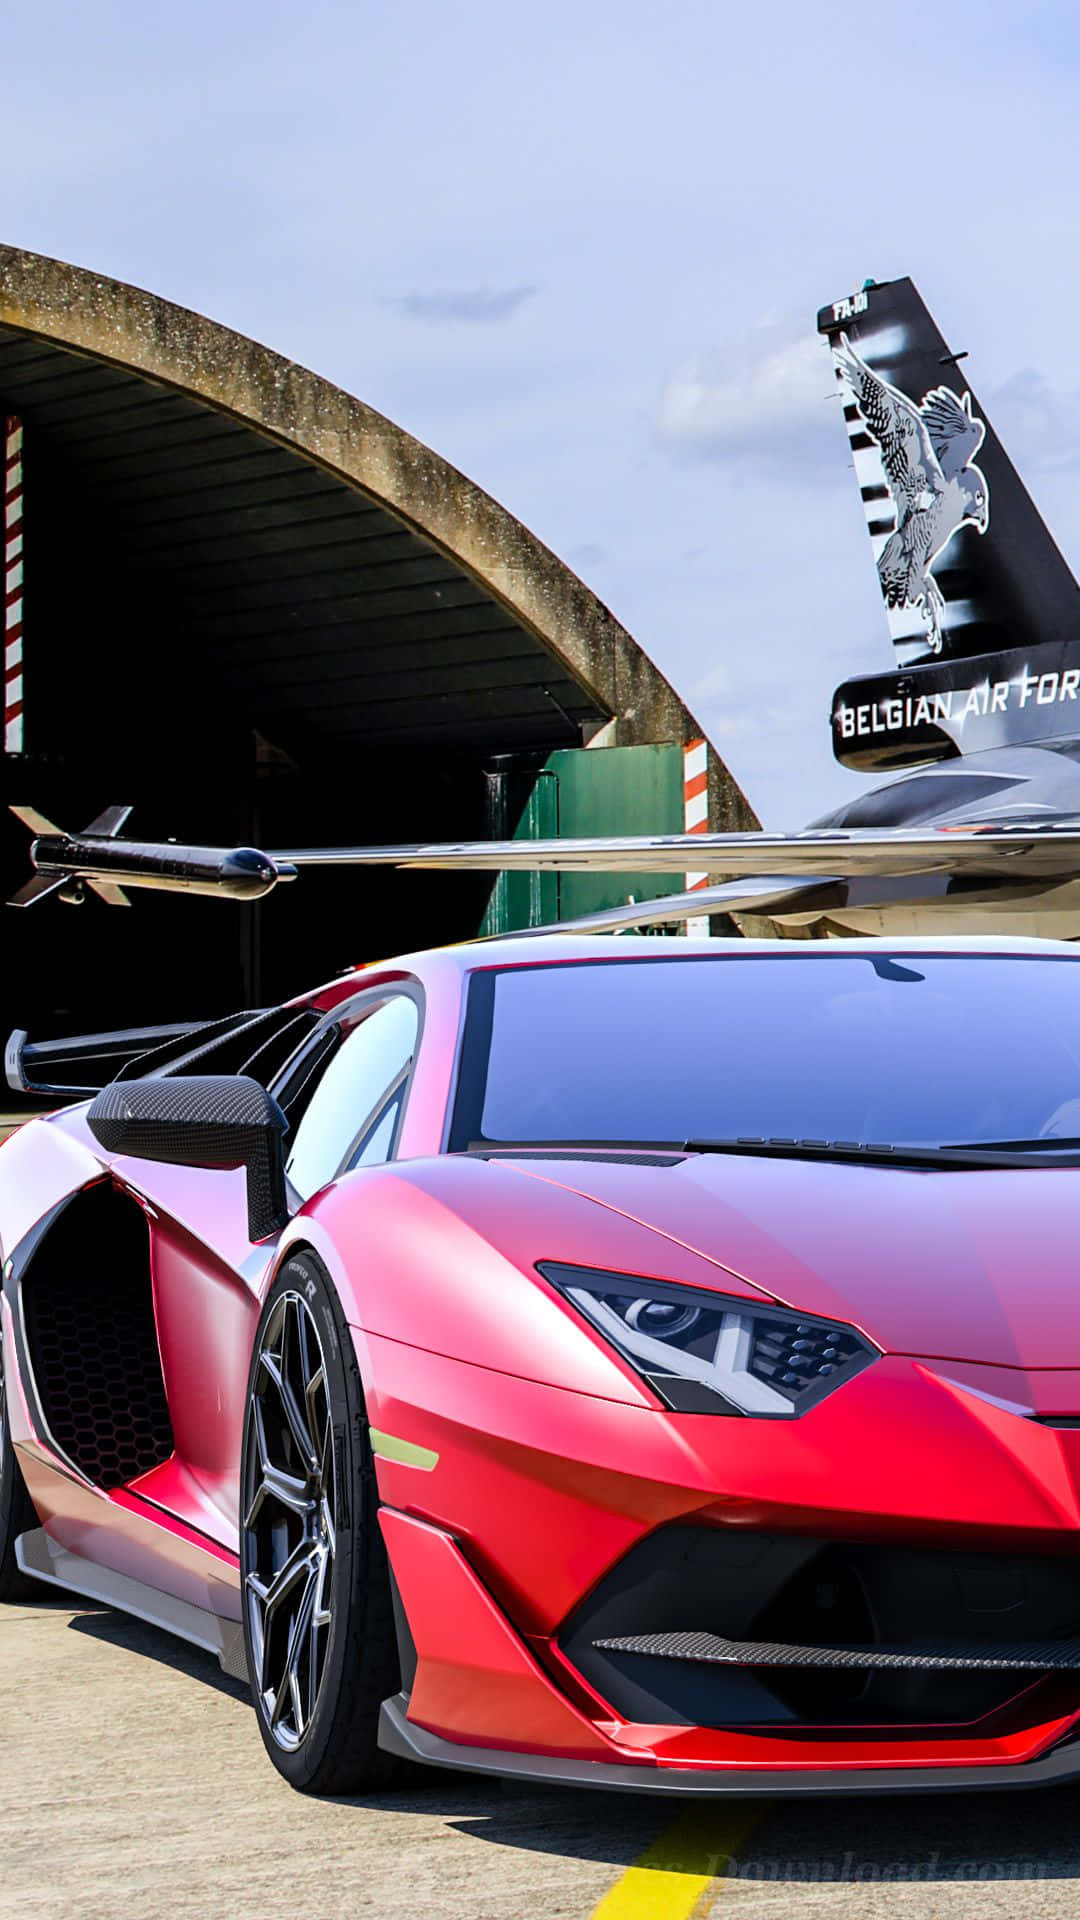 Get Ready to Experience the Luxurious Lamborghini Phone Wallpaper